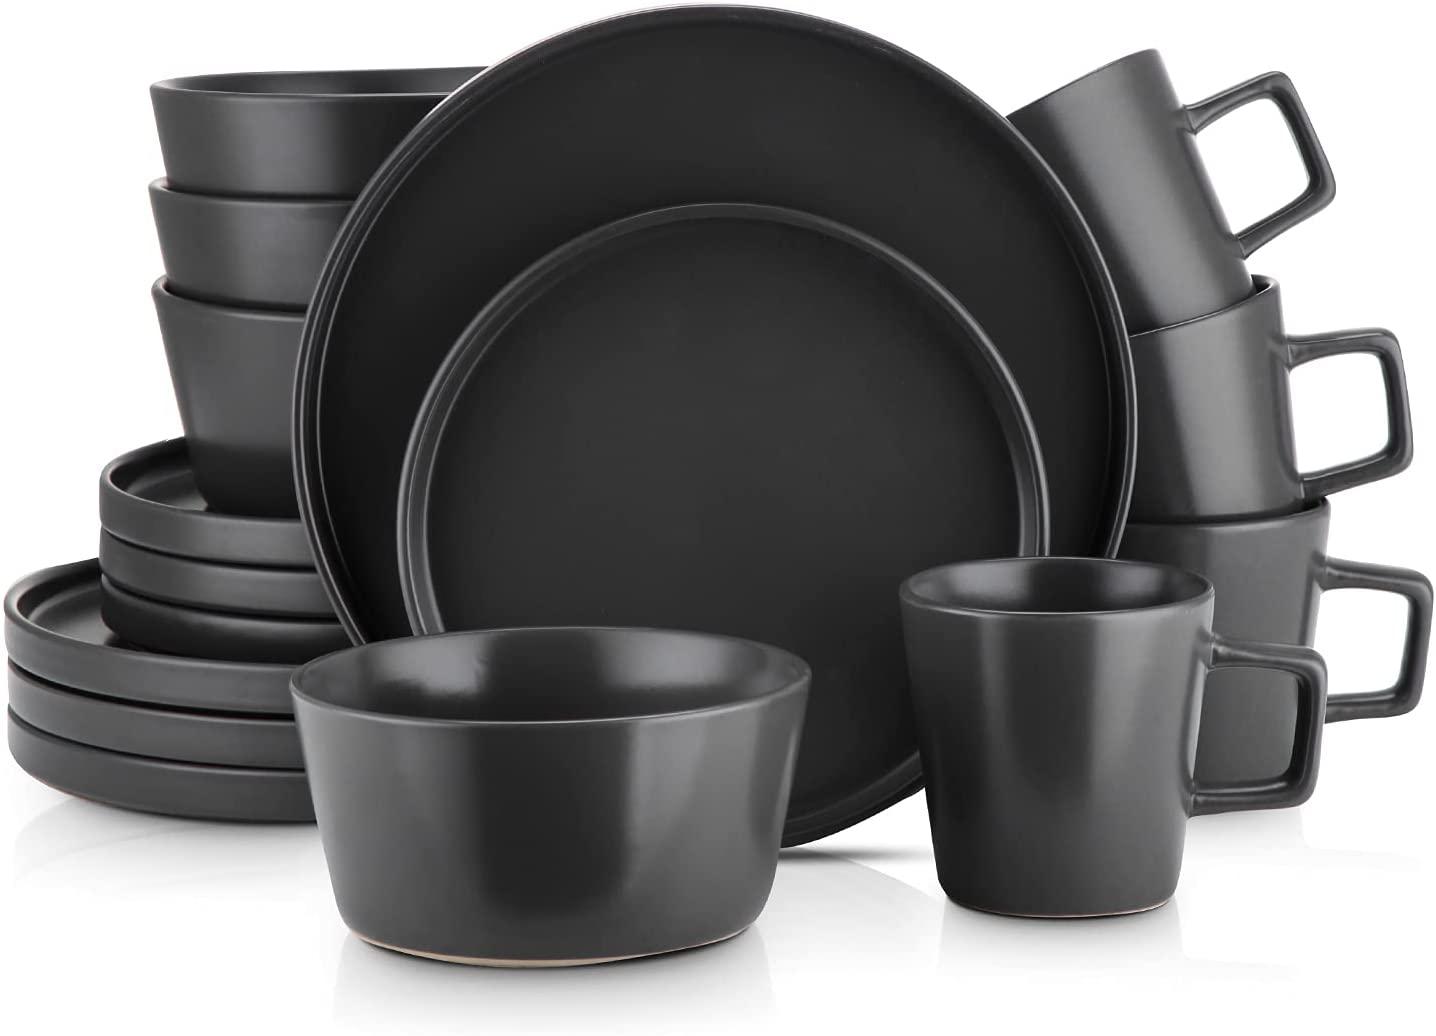 Stone Lain Coupe Dinnerware Set for $47.99 Shipped